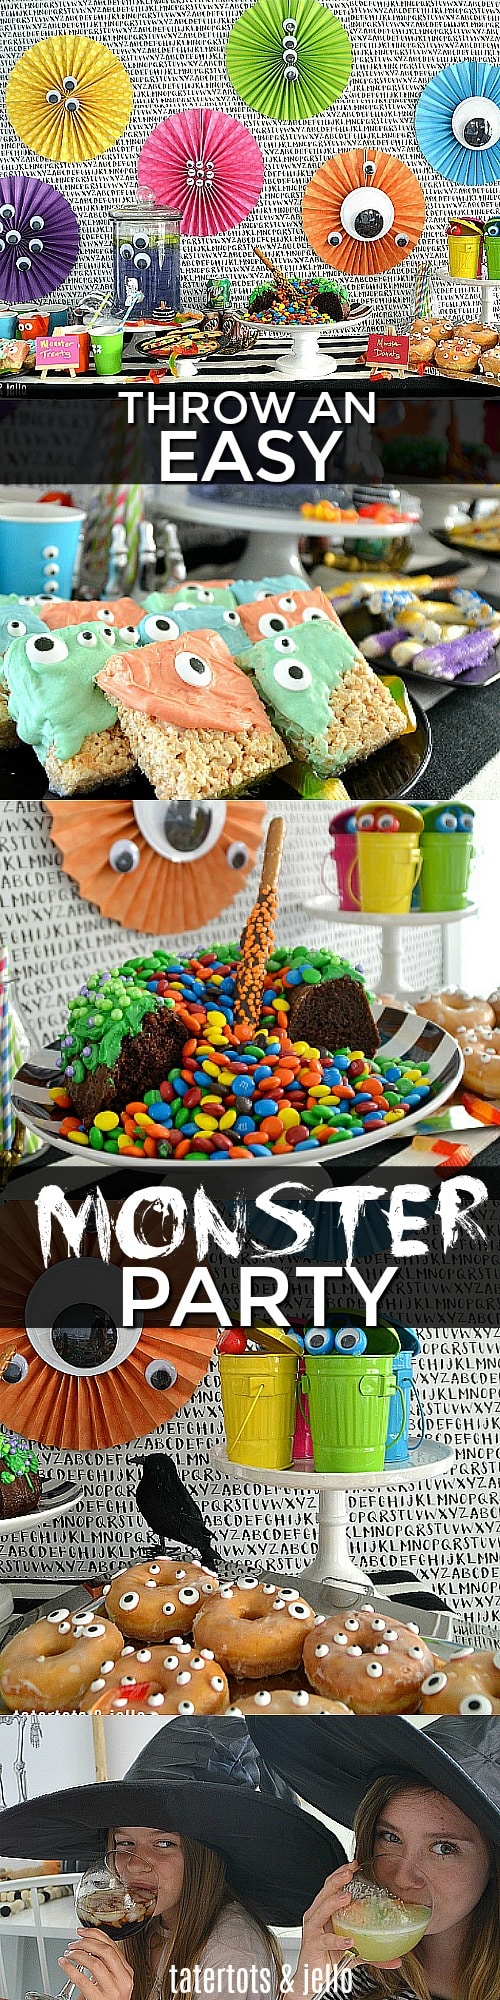 monster party with witches cauldron cake 